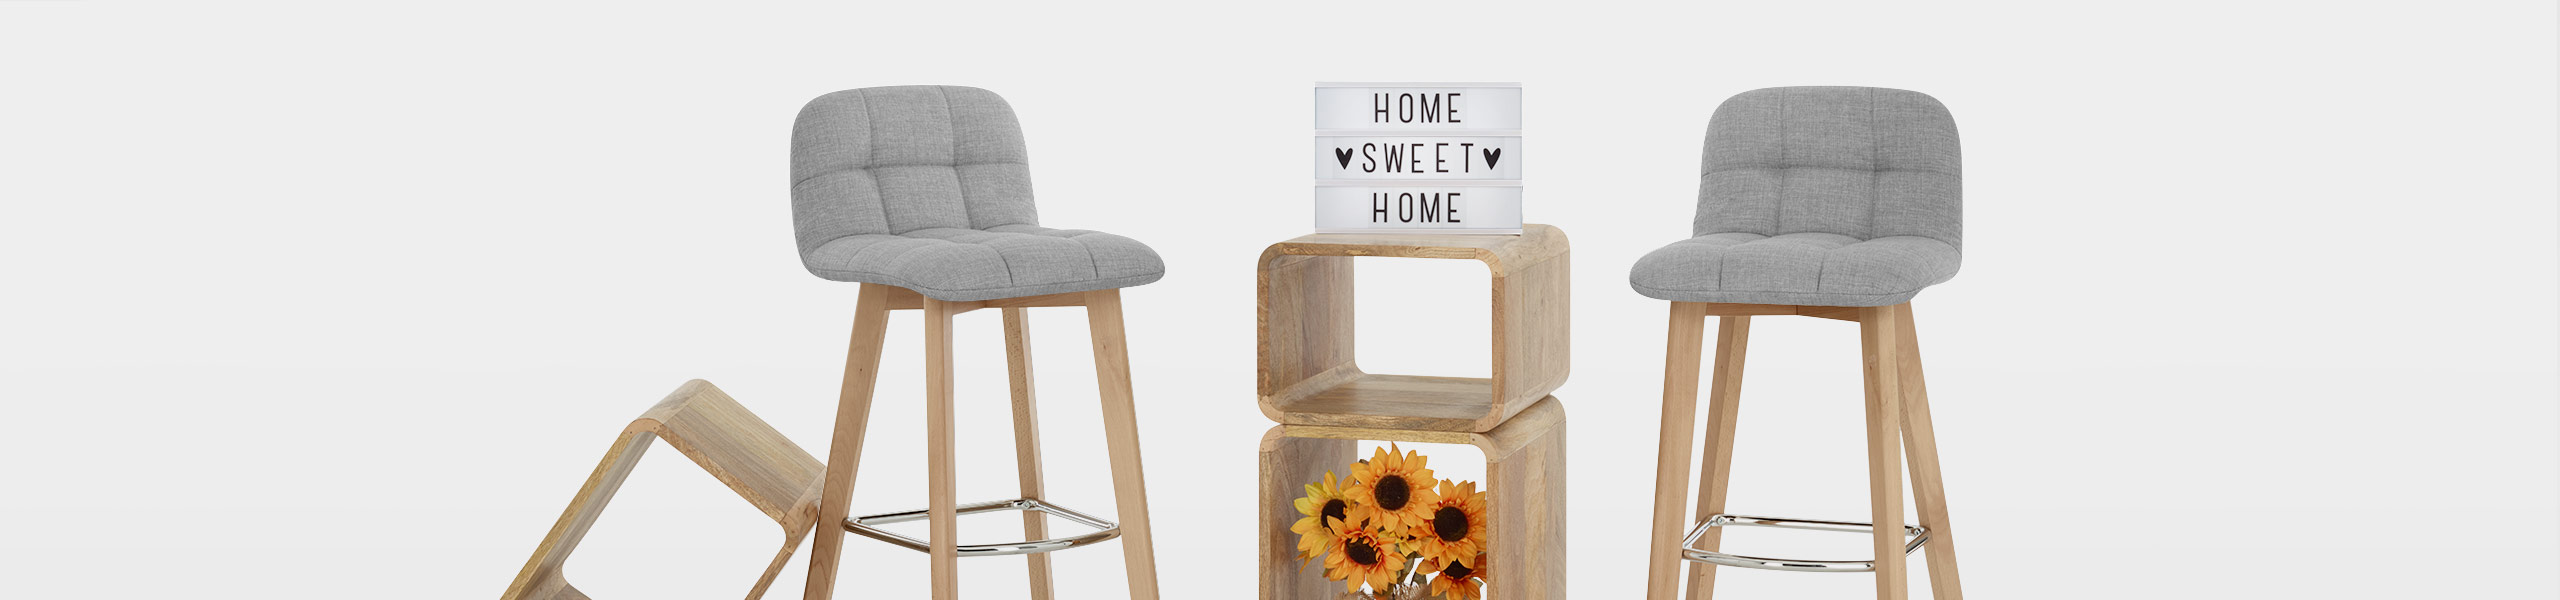 Hex Wooden Stool Grey Fabric Video Banner